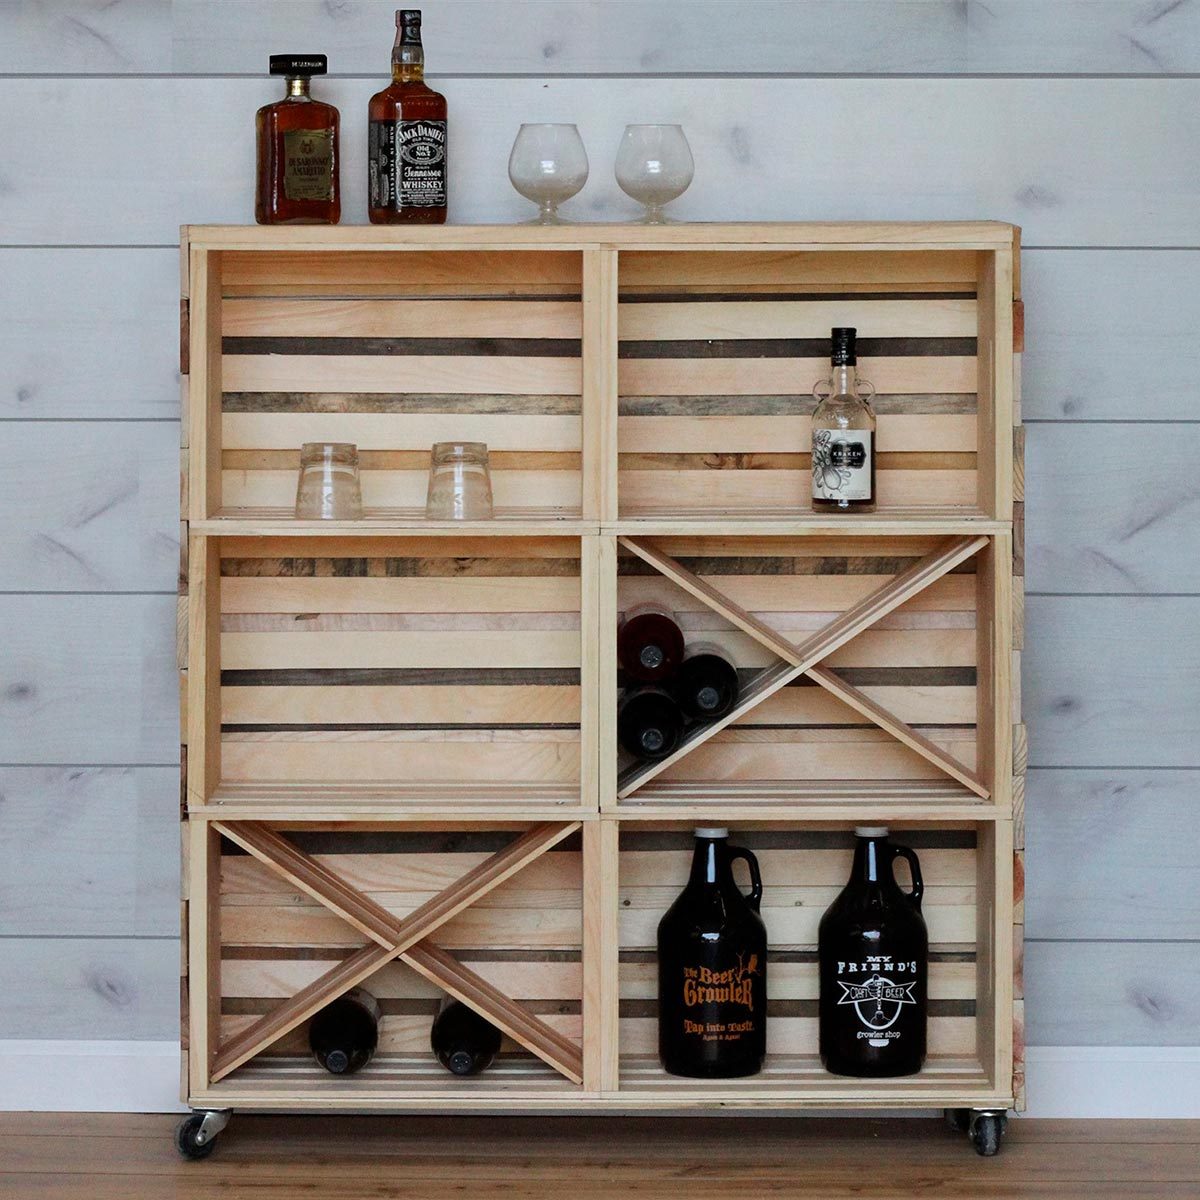 How to Build a Bar Cart with Crates